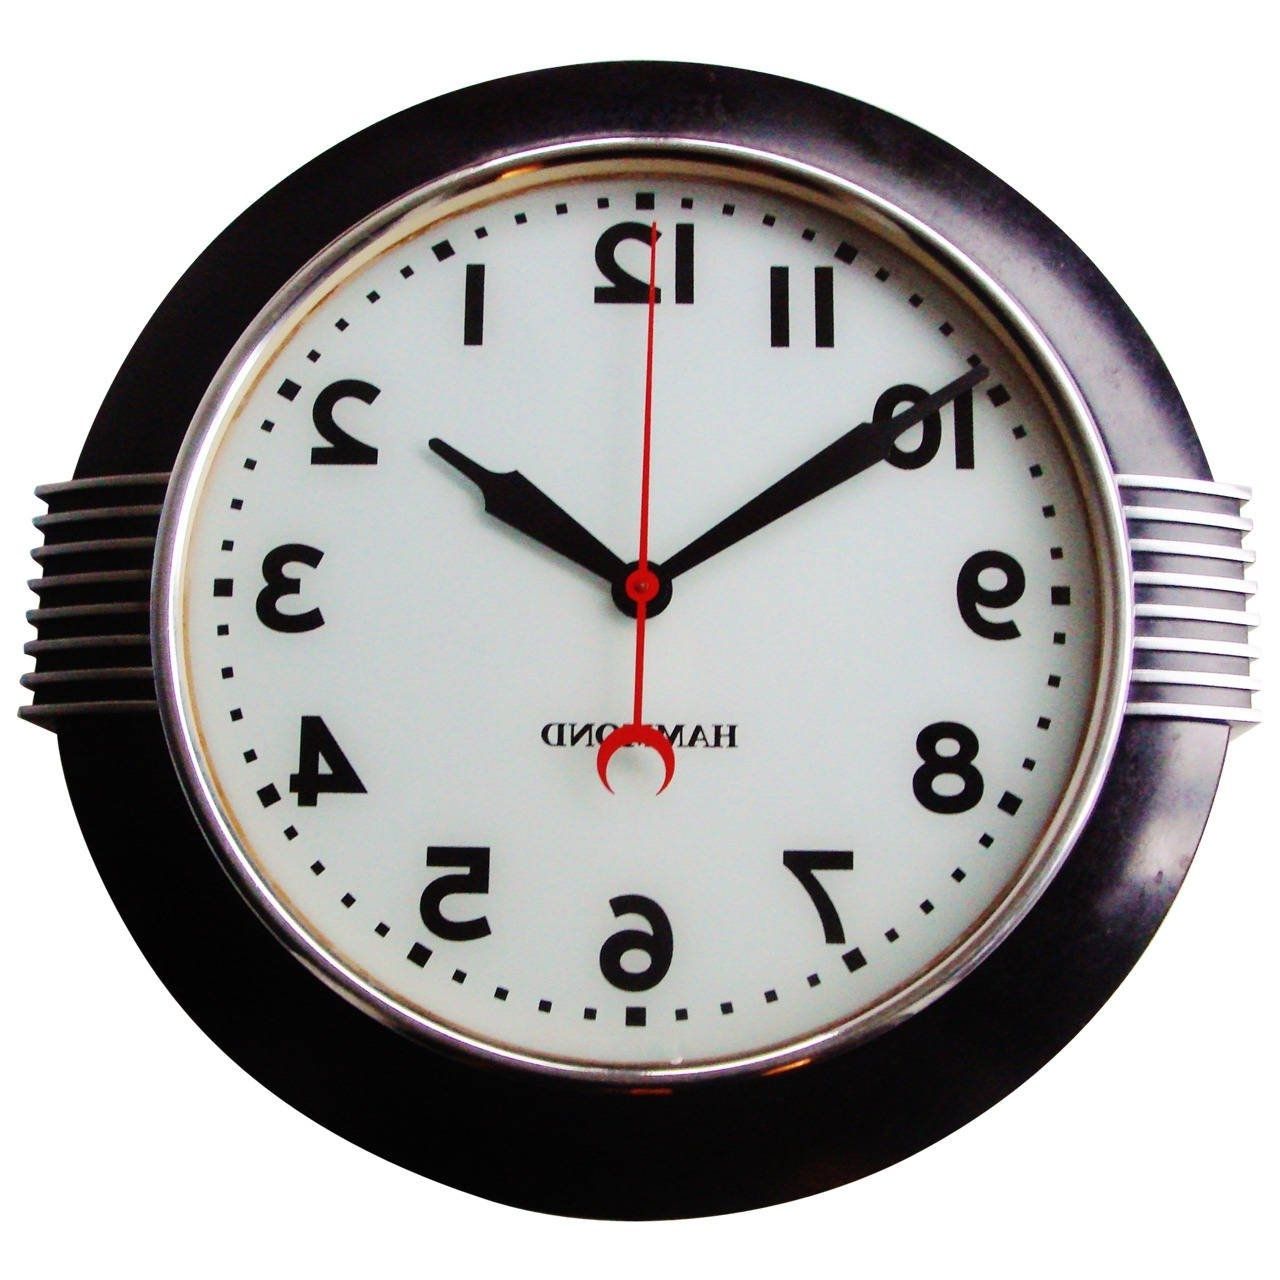 Widely Used Art Deco Wall Clocks Intended For Large American Art Deco Chrome And Black Illuminated Dial Wall (View 1 of 15)